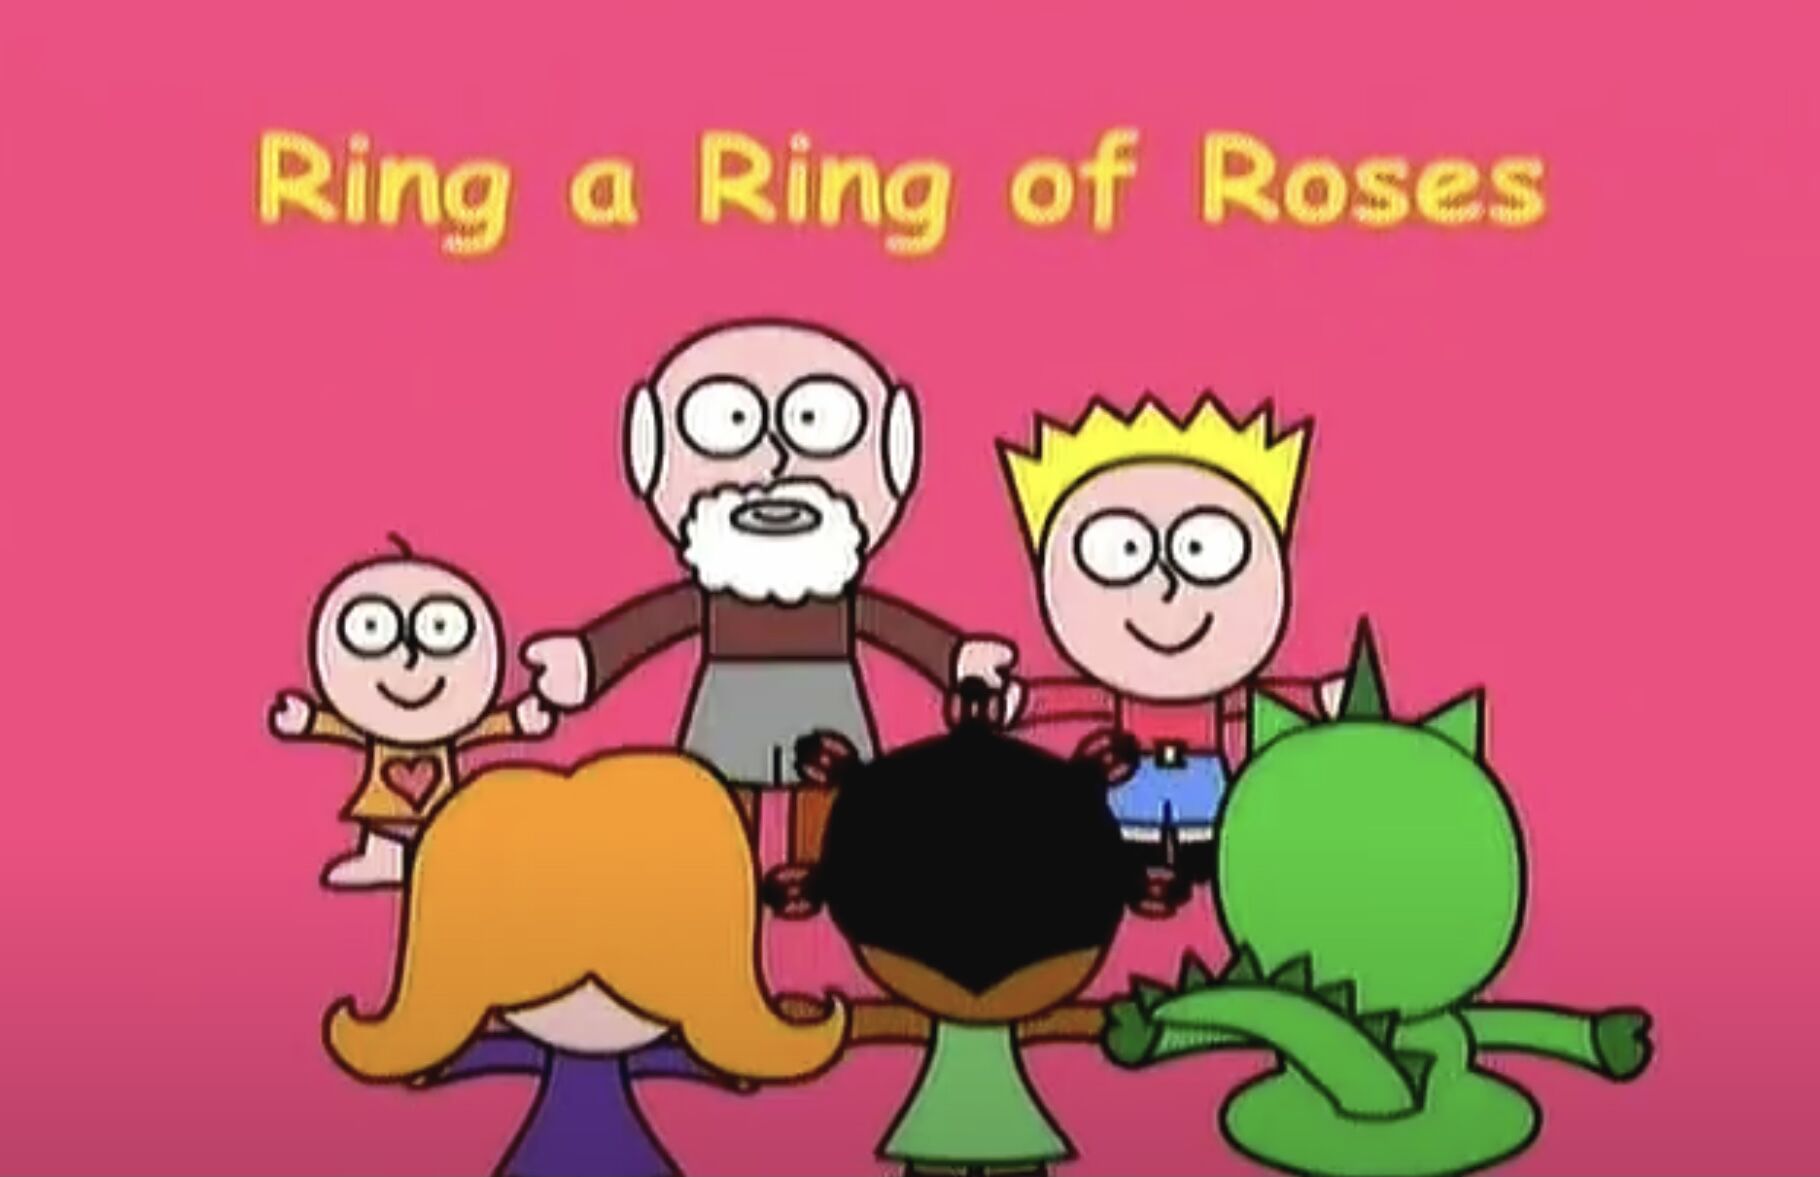 Ring a Ring o' Roses: albums, songs, playlists | Listen on Deezer